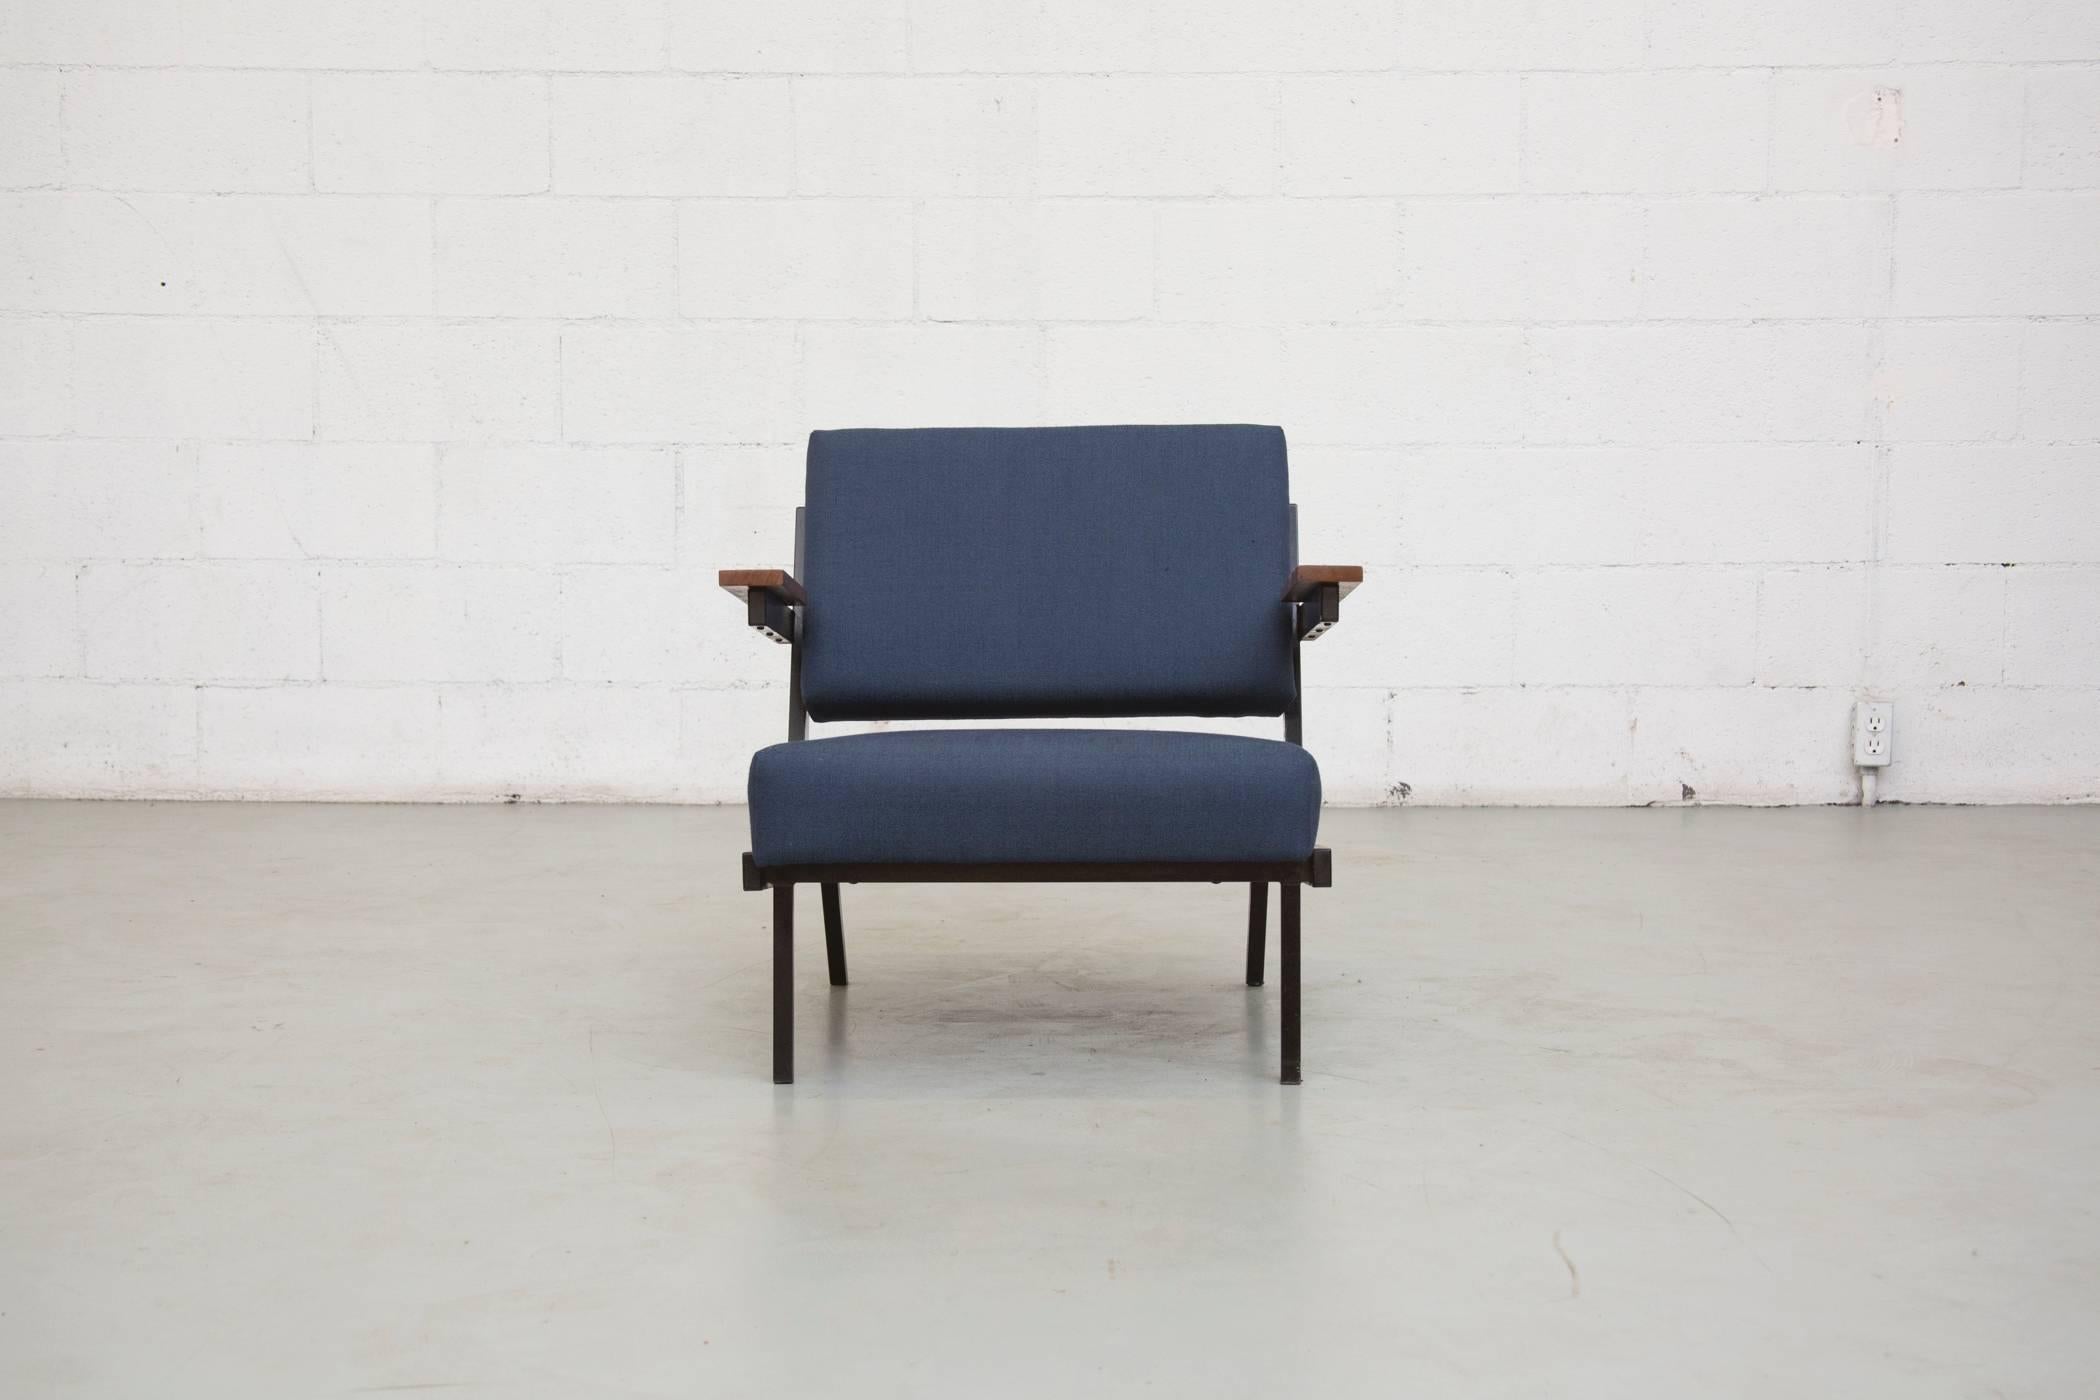 Great low sitting lounge chairs with enameled black metal frame and finished teak armrests. New in indigo upholstery. Frames are in original condition with visible signs of wear consistent with their age and usage. Set price.